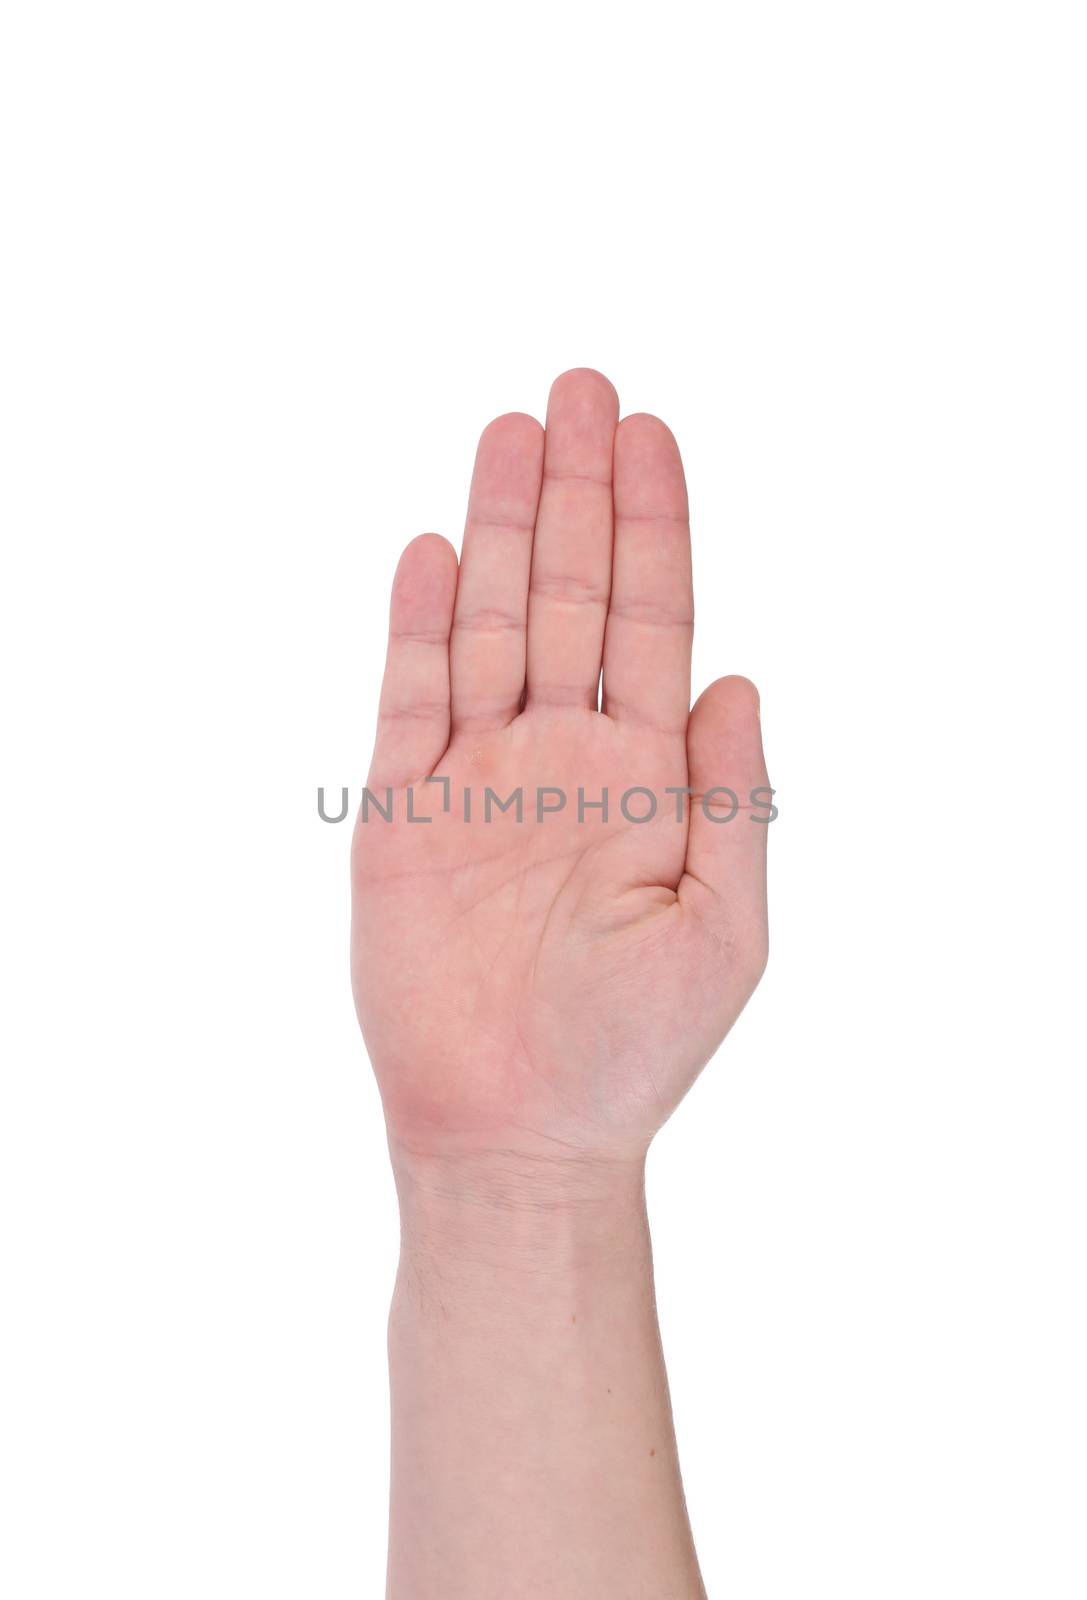 Man's hand. Isolated on a white background.